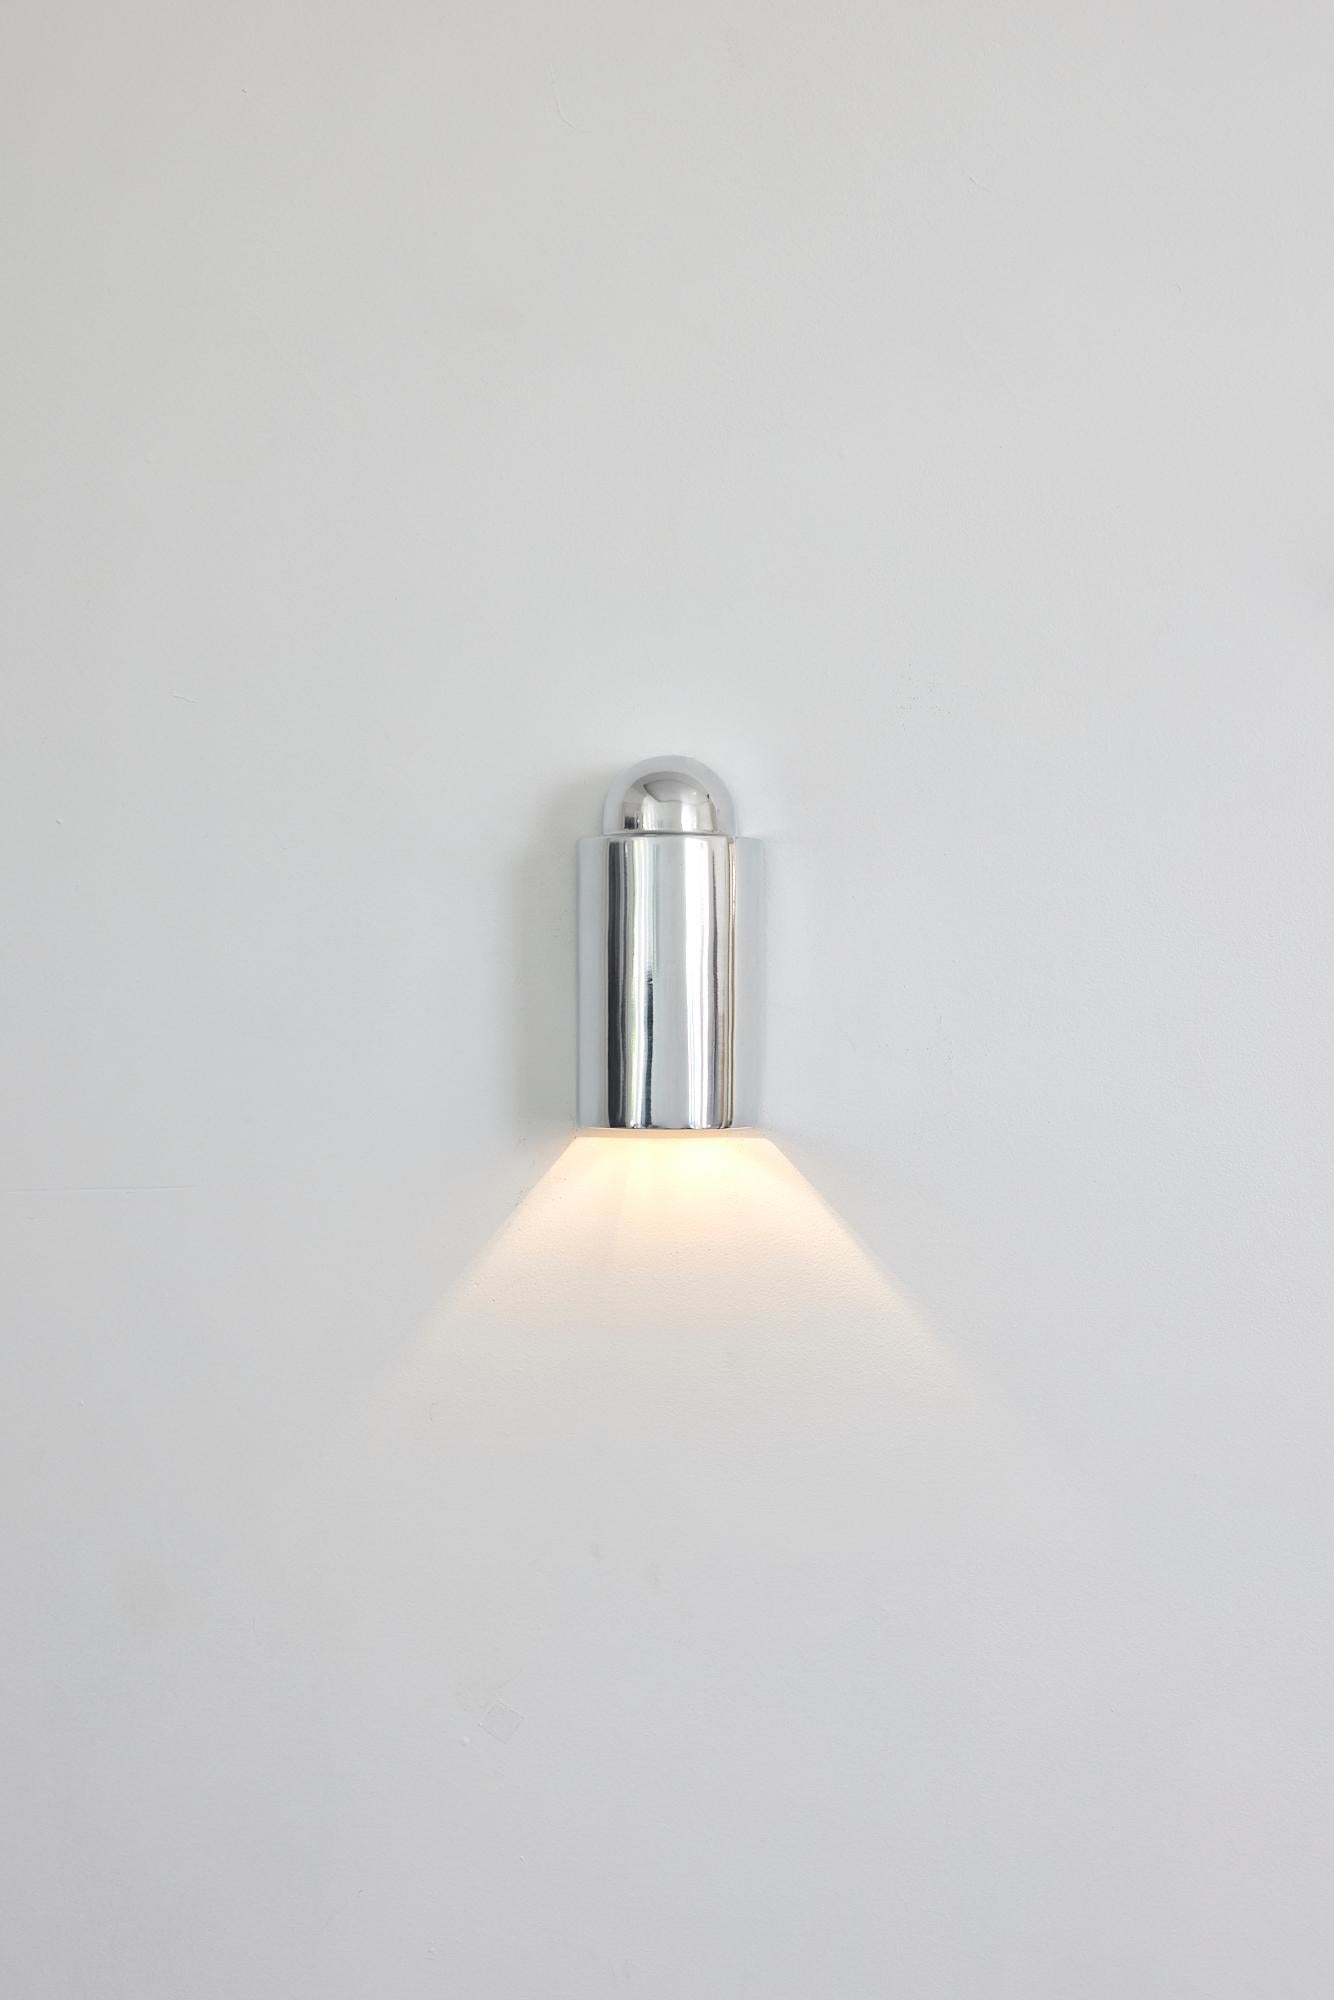 Crafted in Sydney, Australia by Dunlin, The Decade Wall Light is a true embodiment of sophistication, making it a perfect choice to welcome your guests in style as a front door light. Its robust design boasts versatility and is perfect for creating